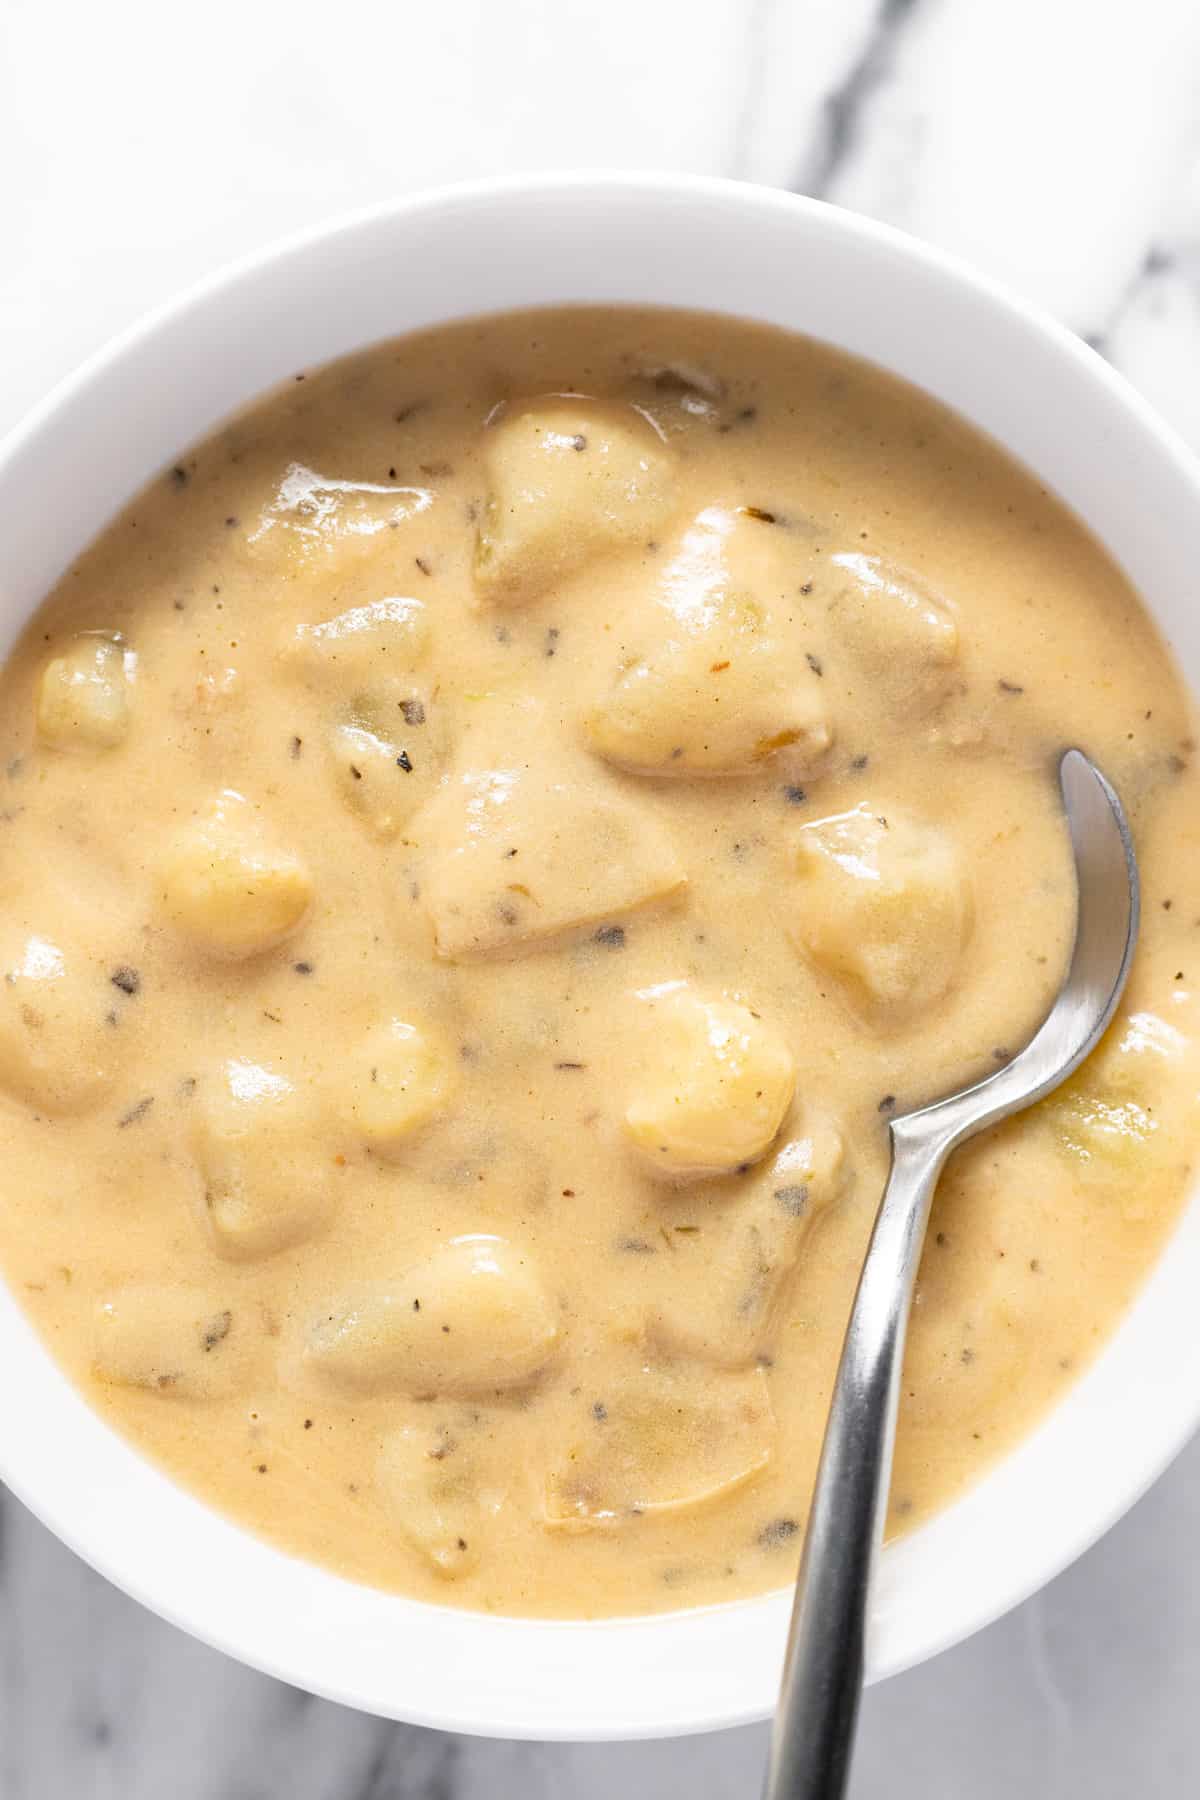 Small bowl filled with creamy potato soup and a spoon.